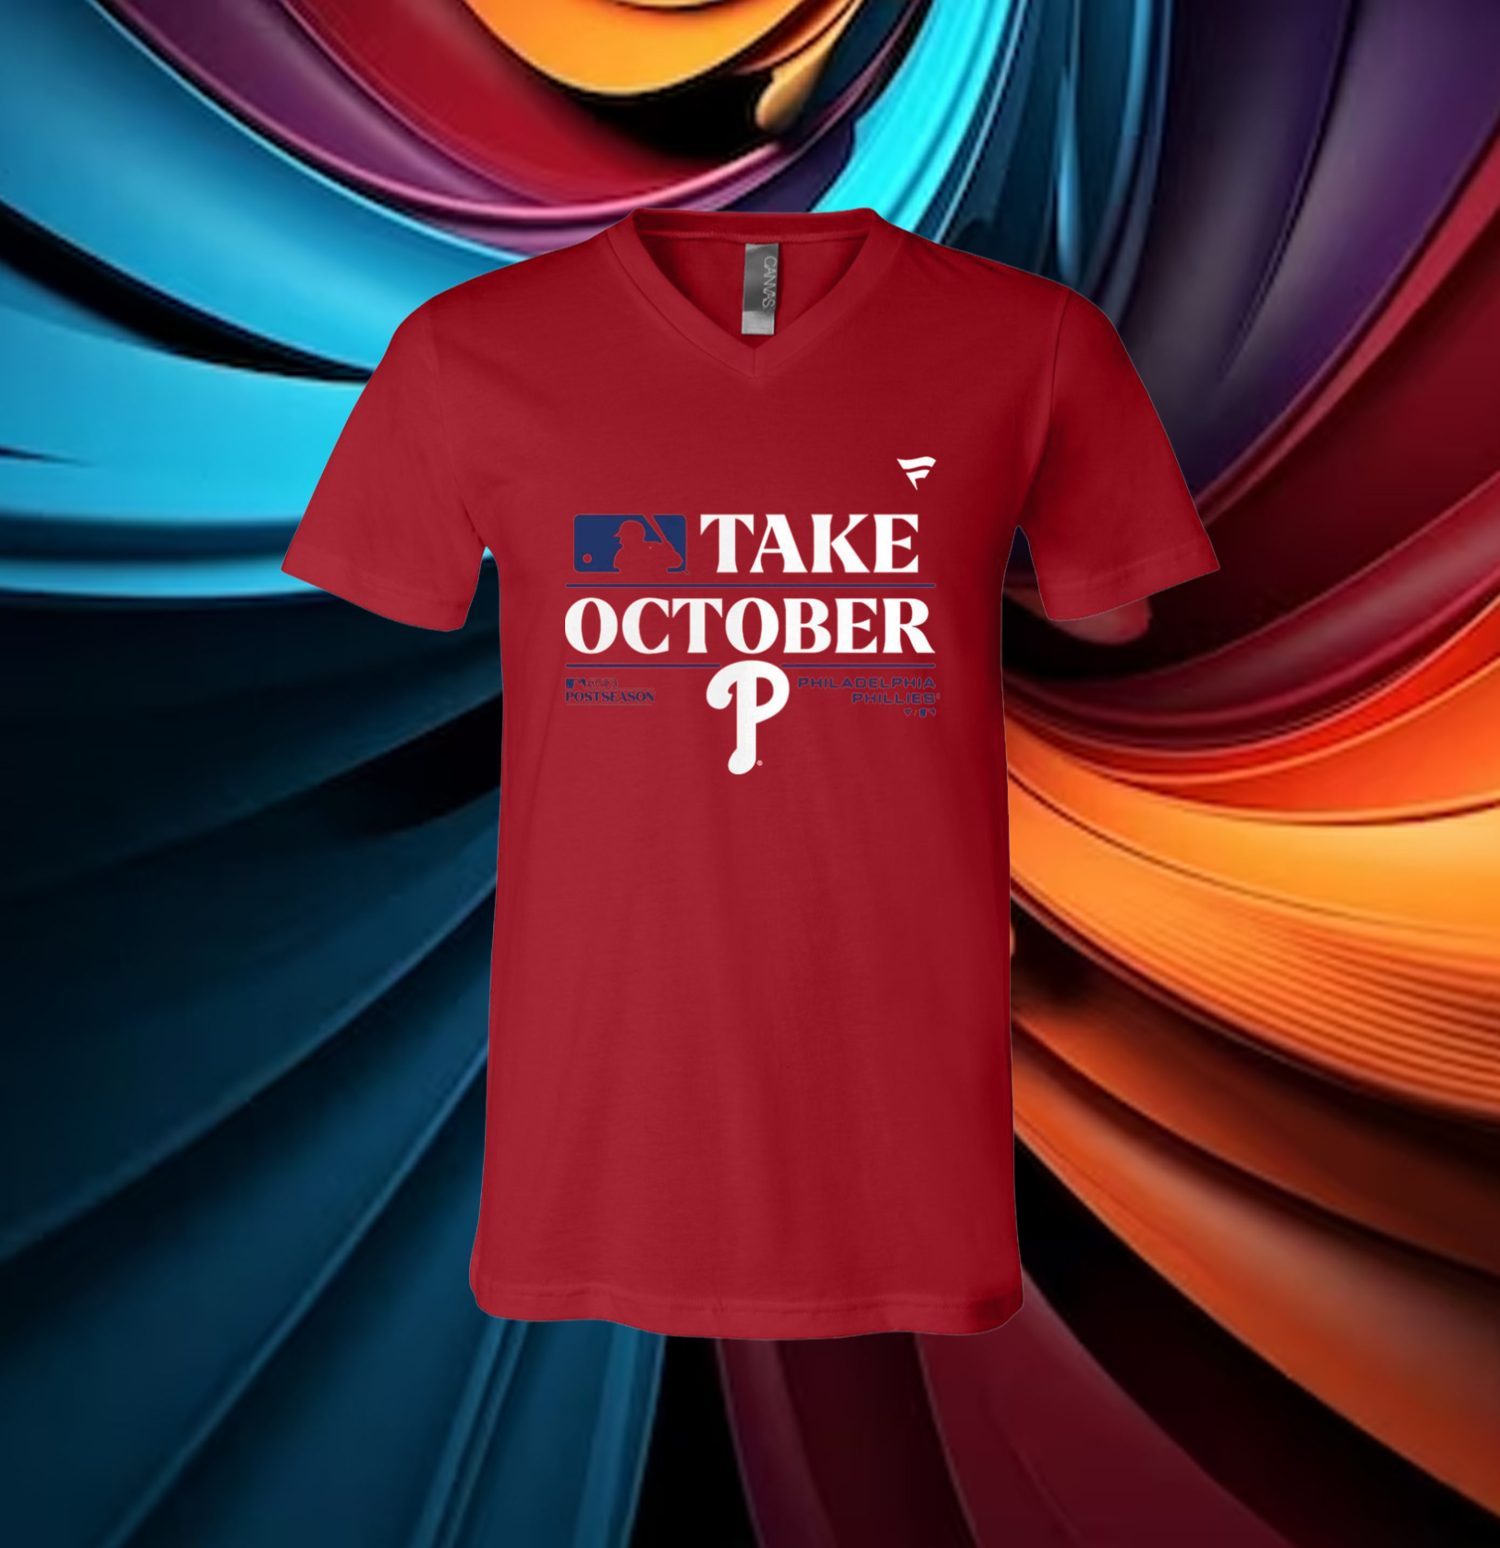 phillies red october 2023